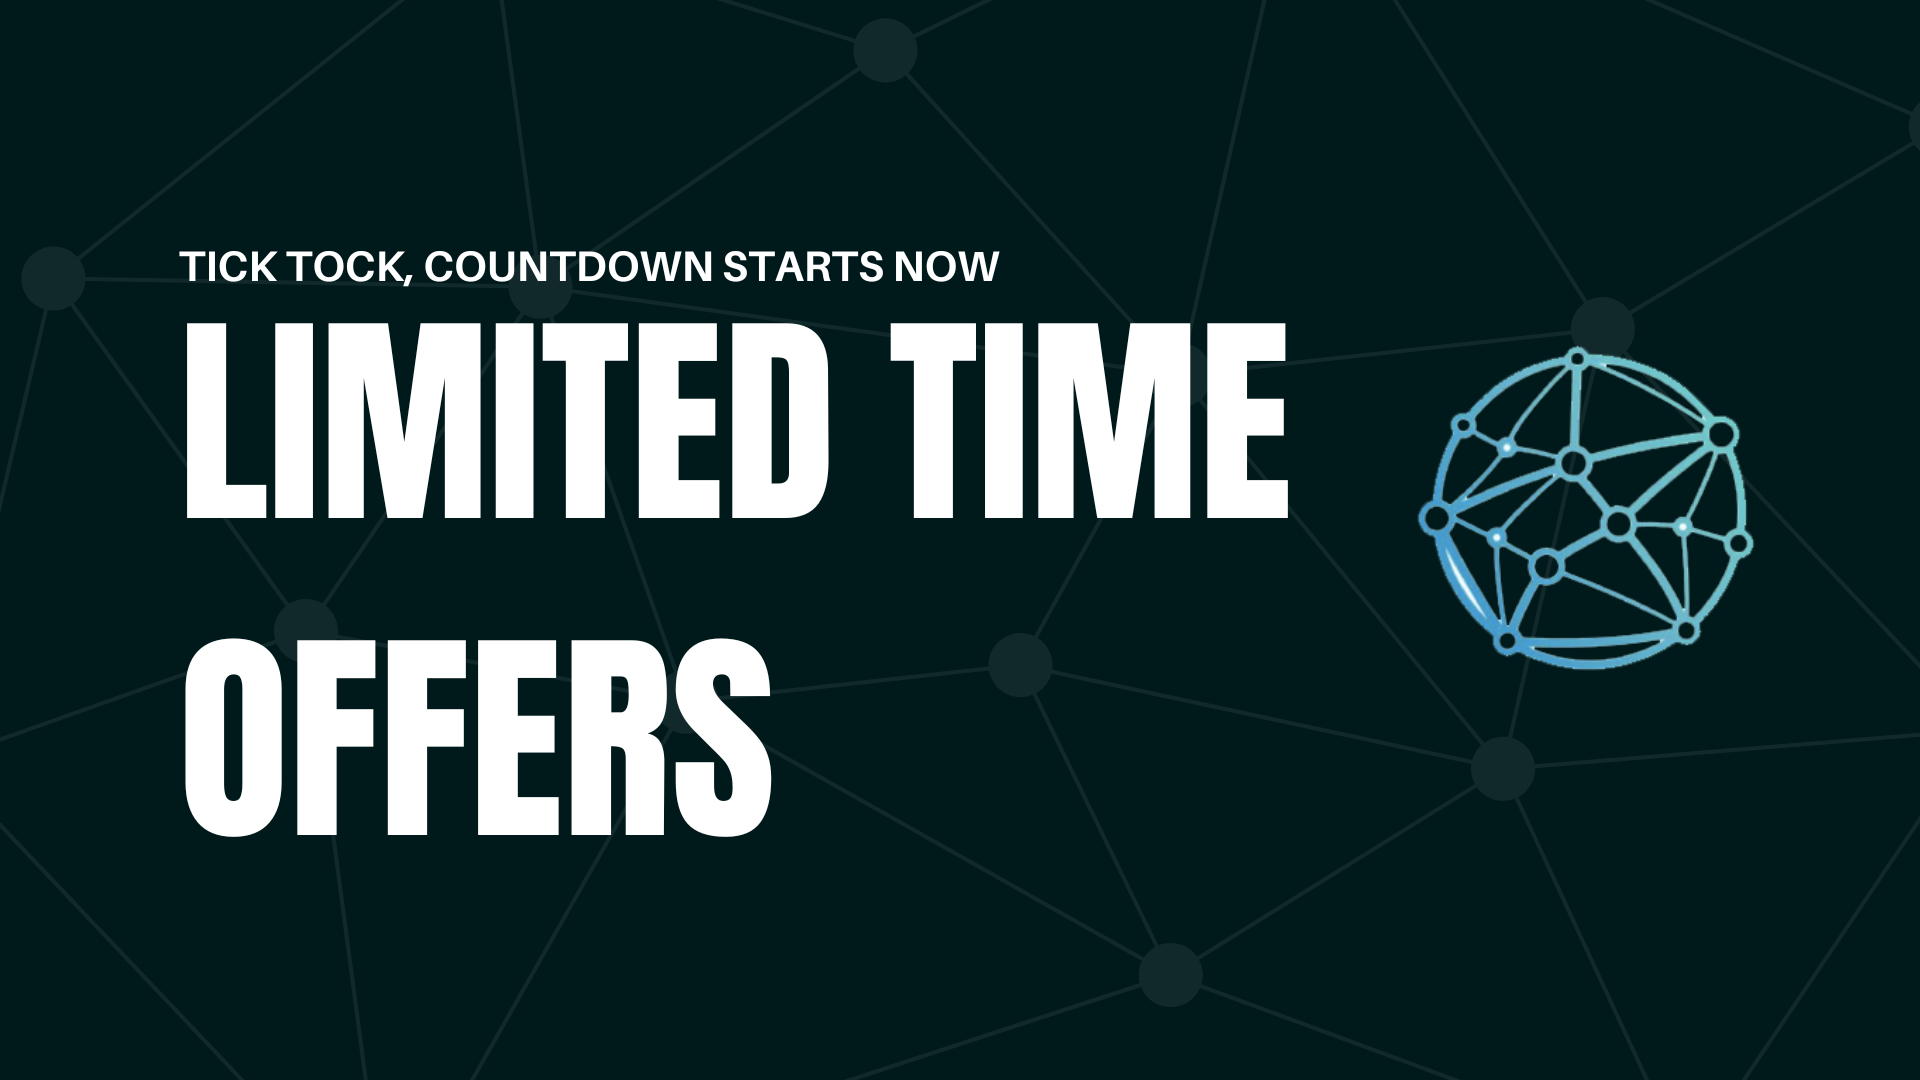 Tick Tock, Countdown Starts Now: Limited Time Offers